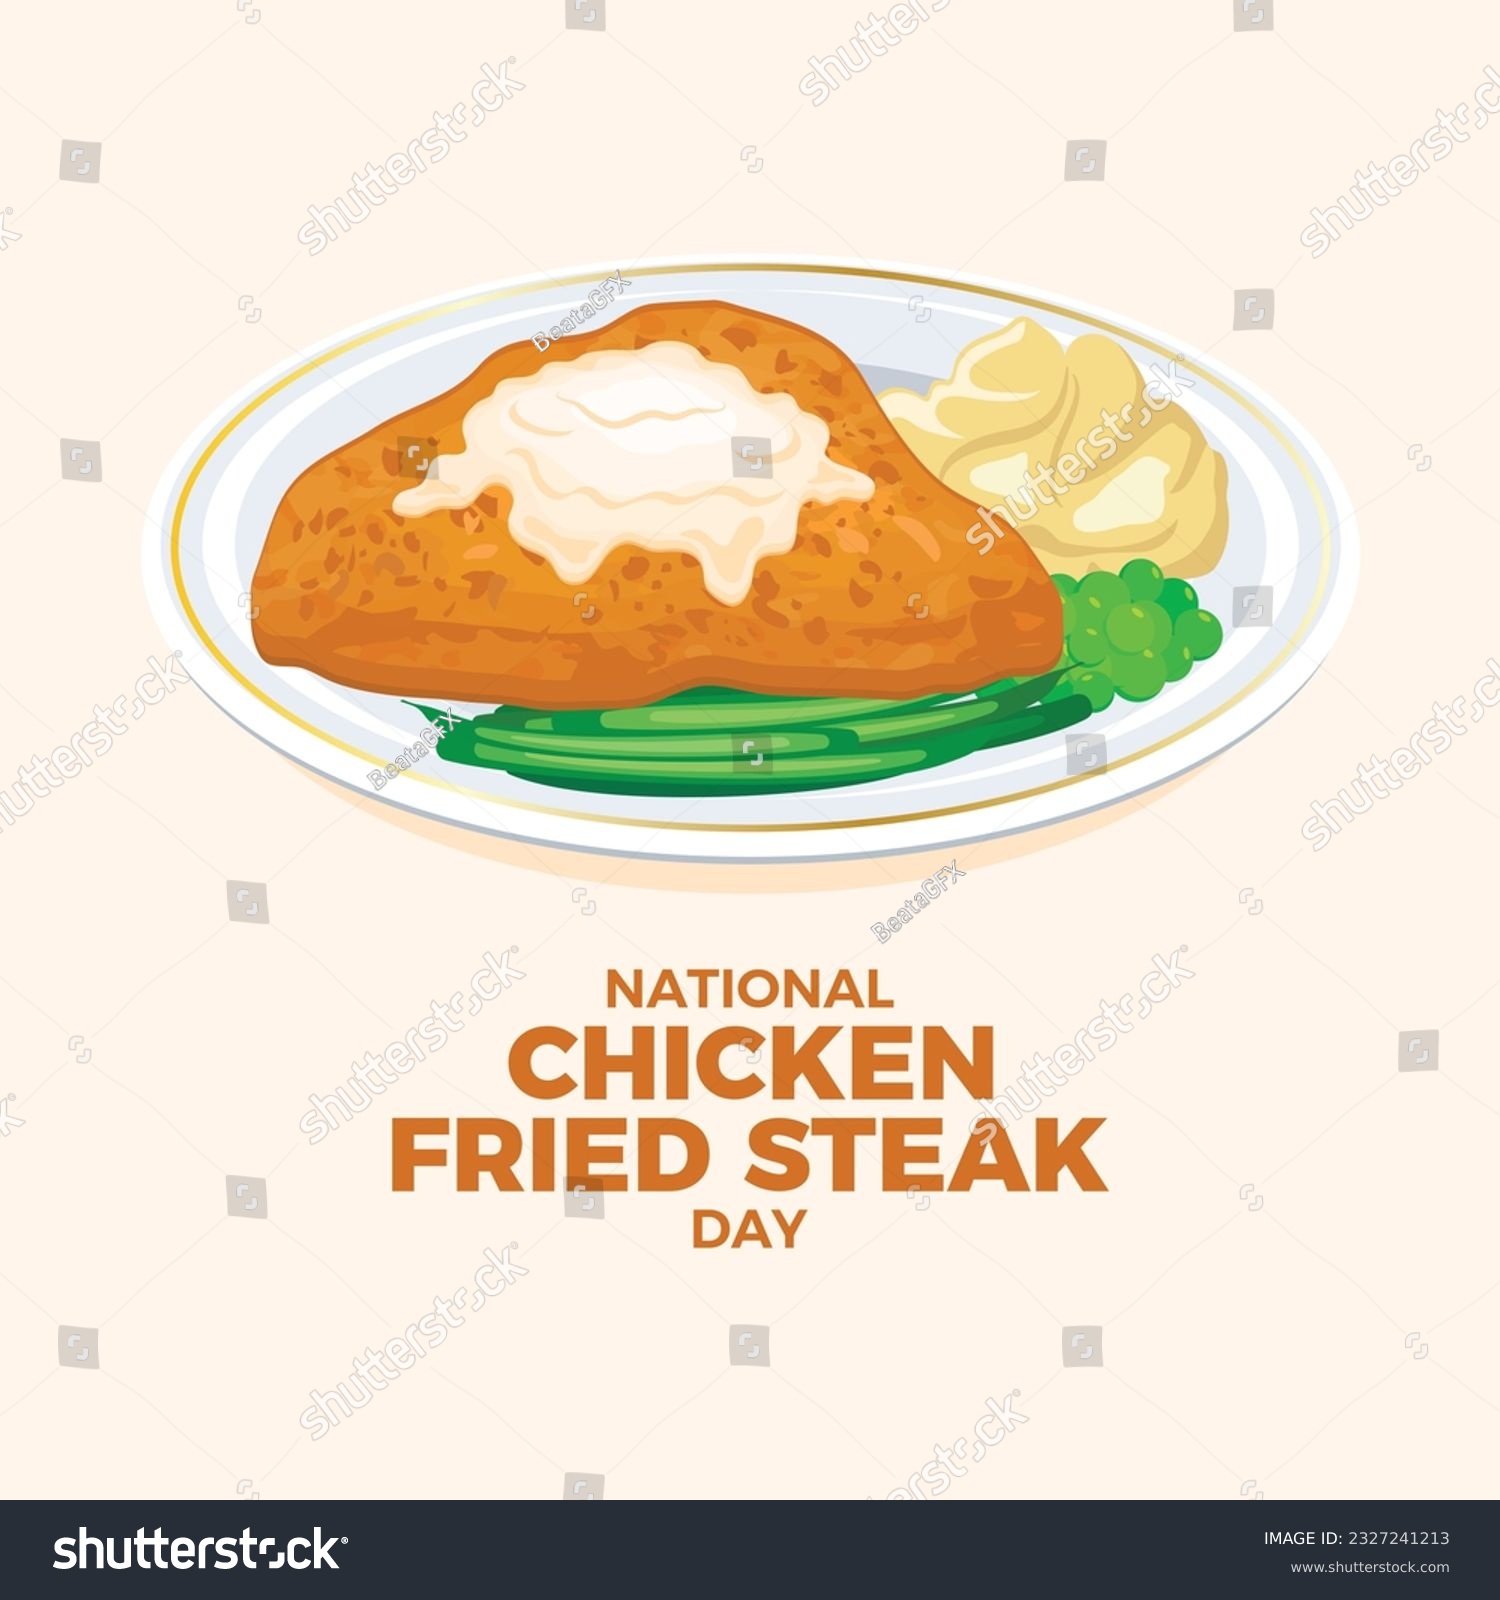 SVG of National Chicken Fried Steak Day vector illustration. Fried steak with mashed potatoes, peas and green beans icon vector. Fried chicken cutlet with creamy gravy on a plate drawing. October 26 svg